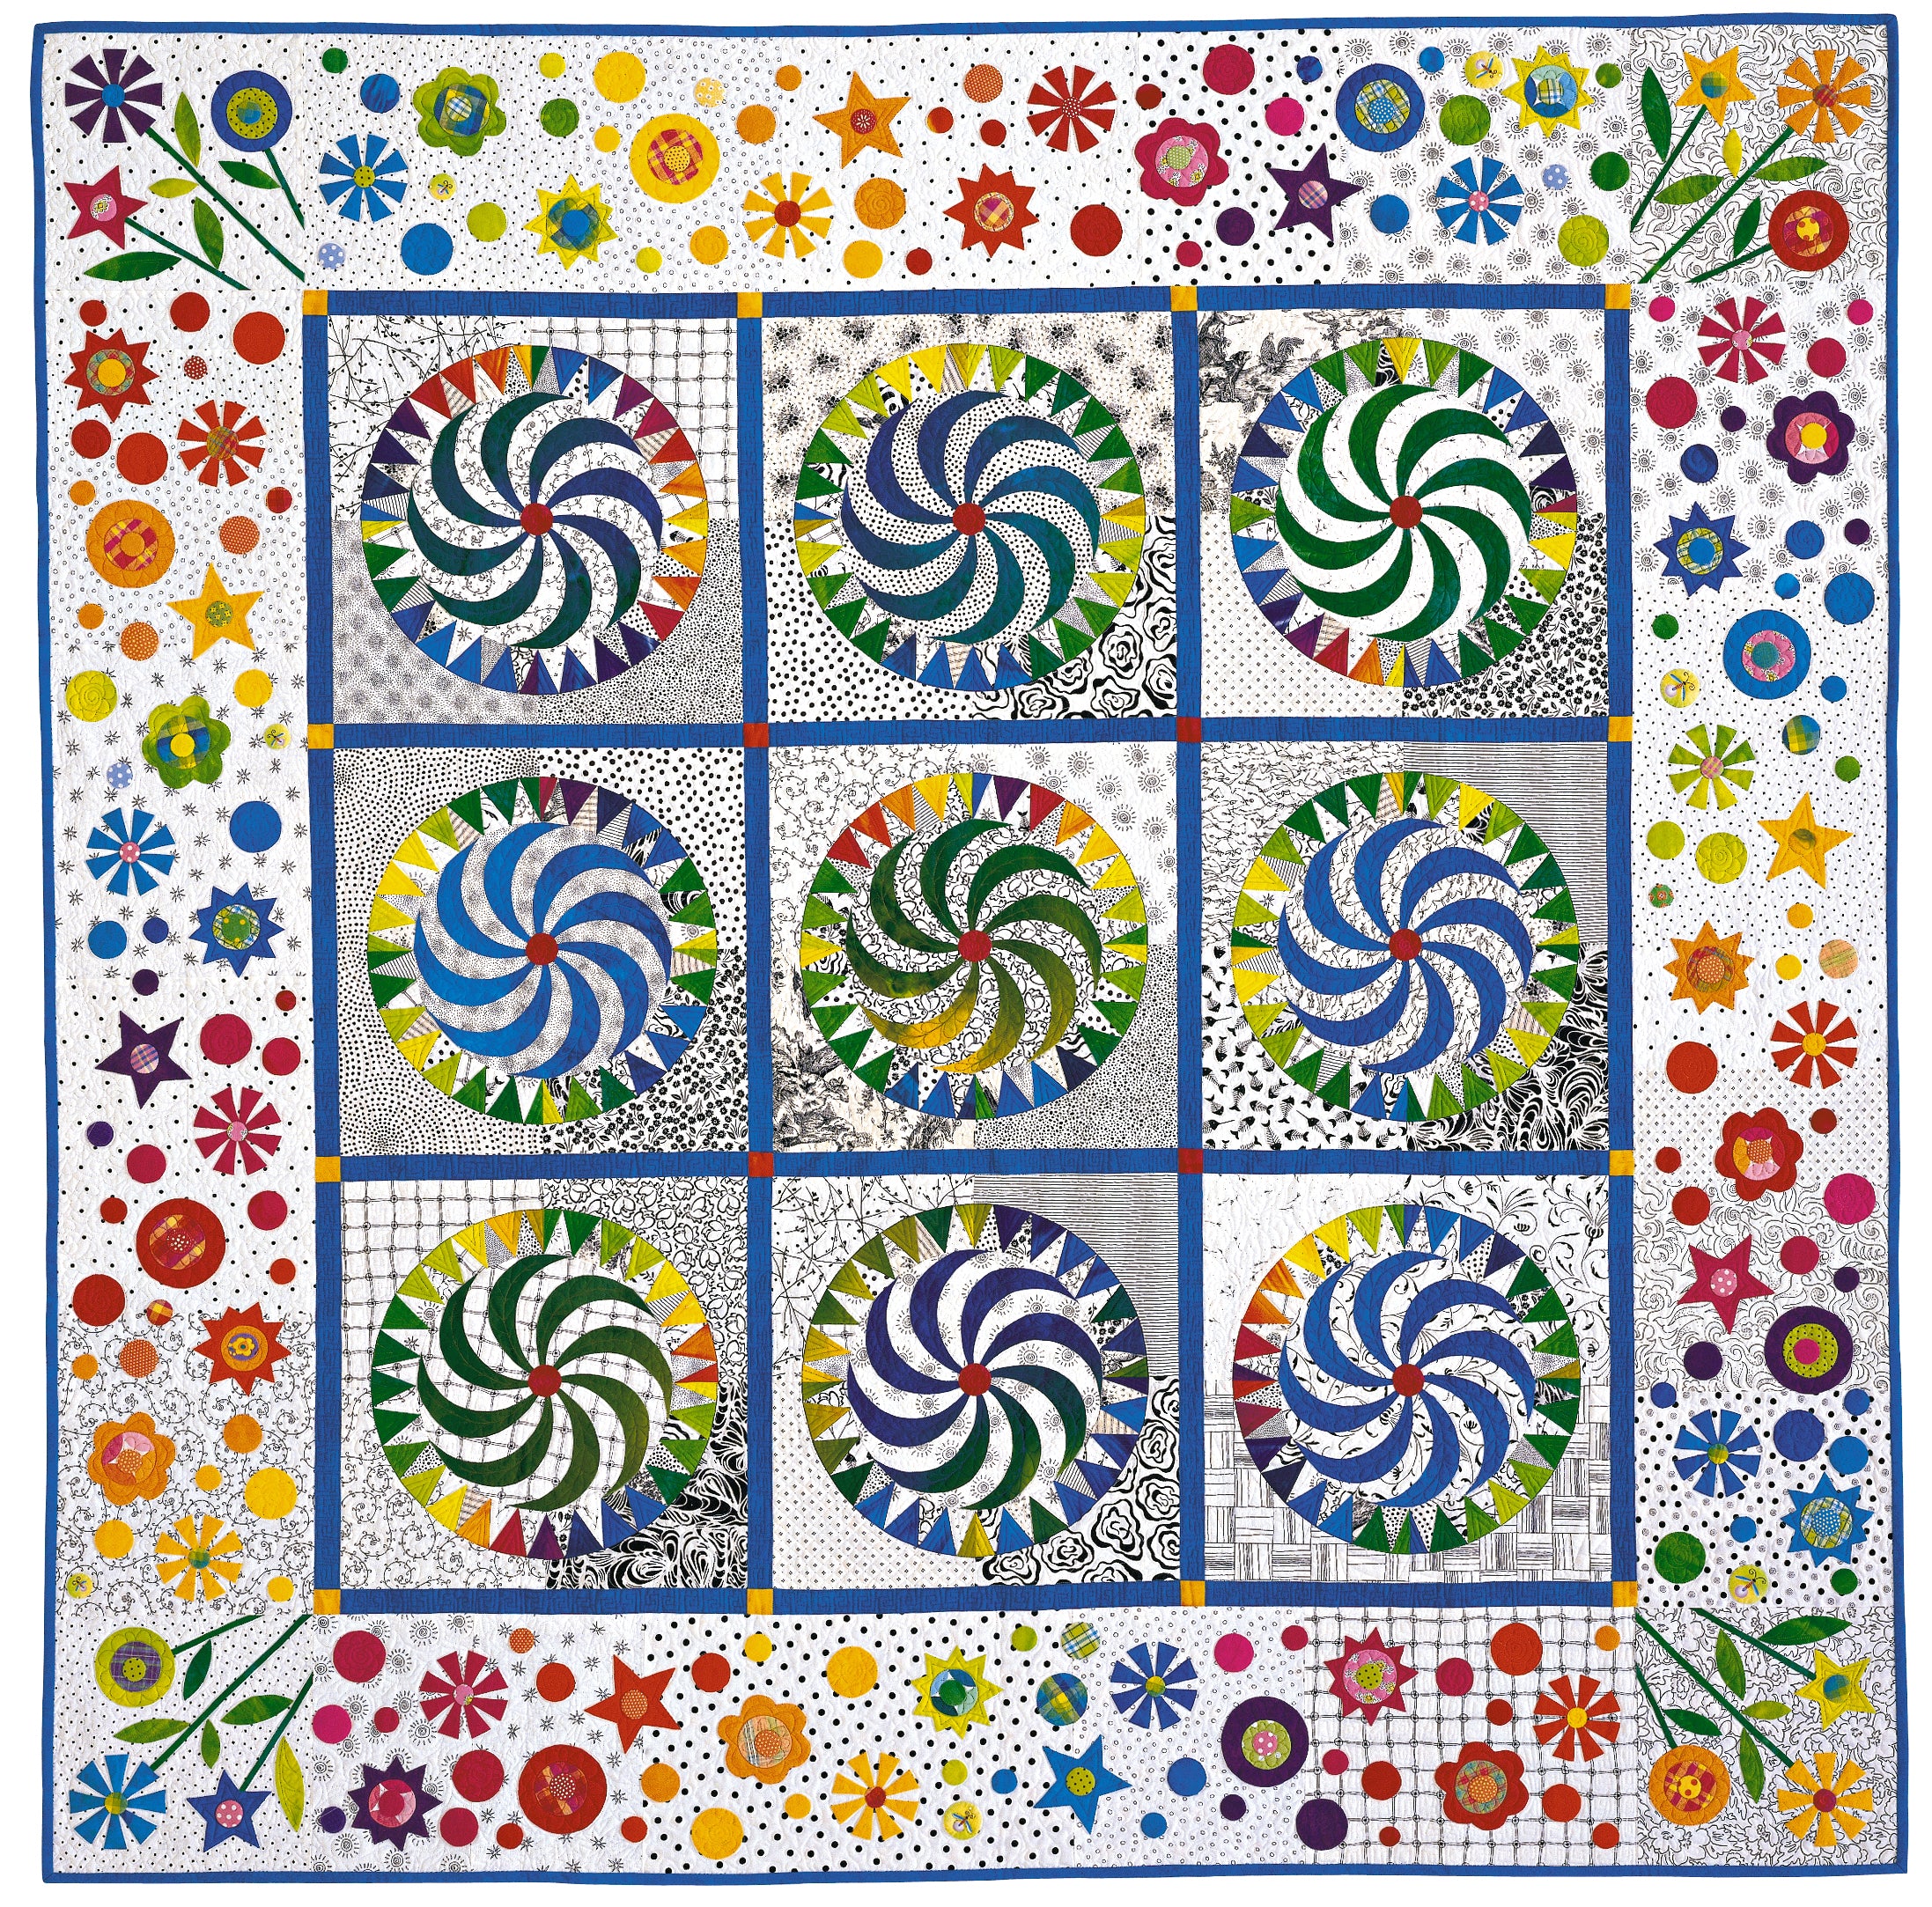 Quilts With A Spin Digital Download